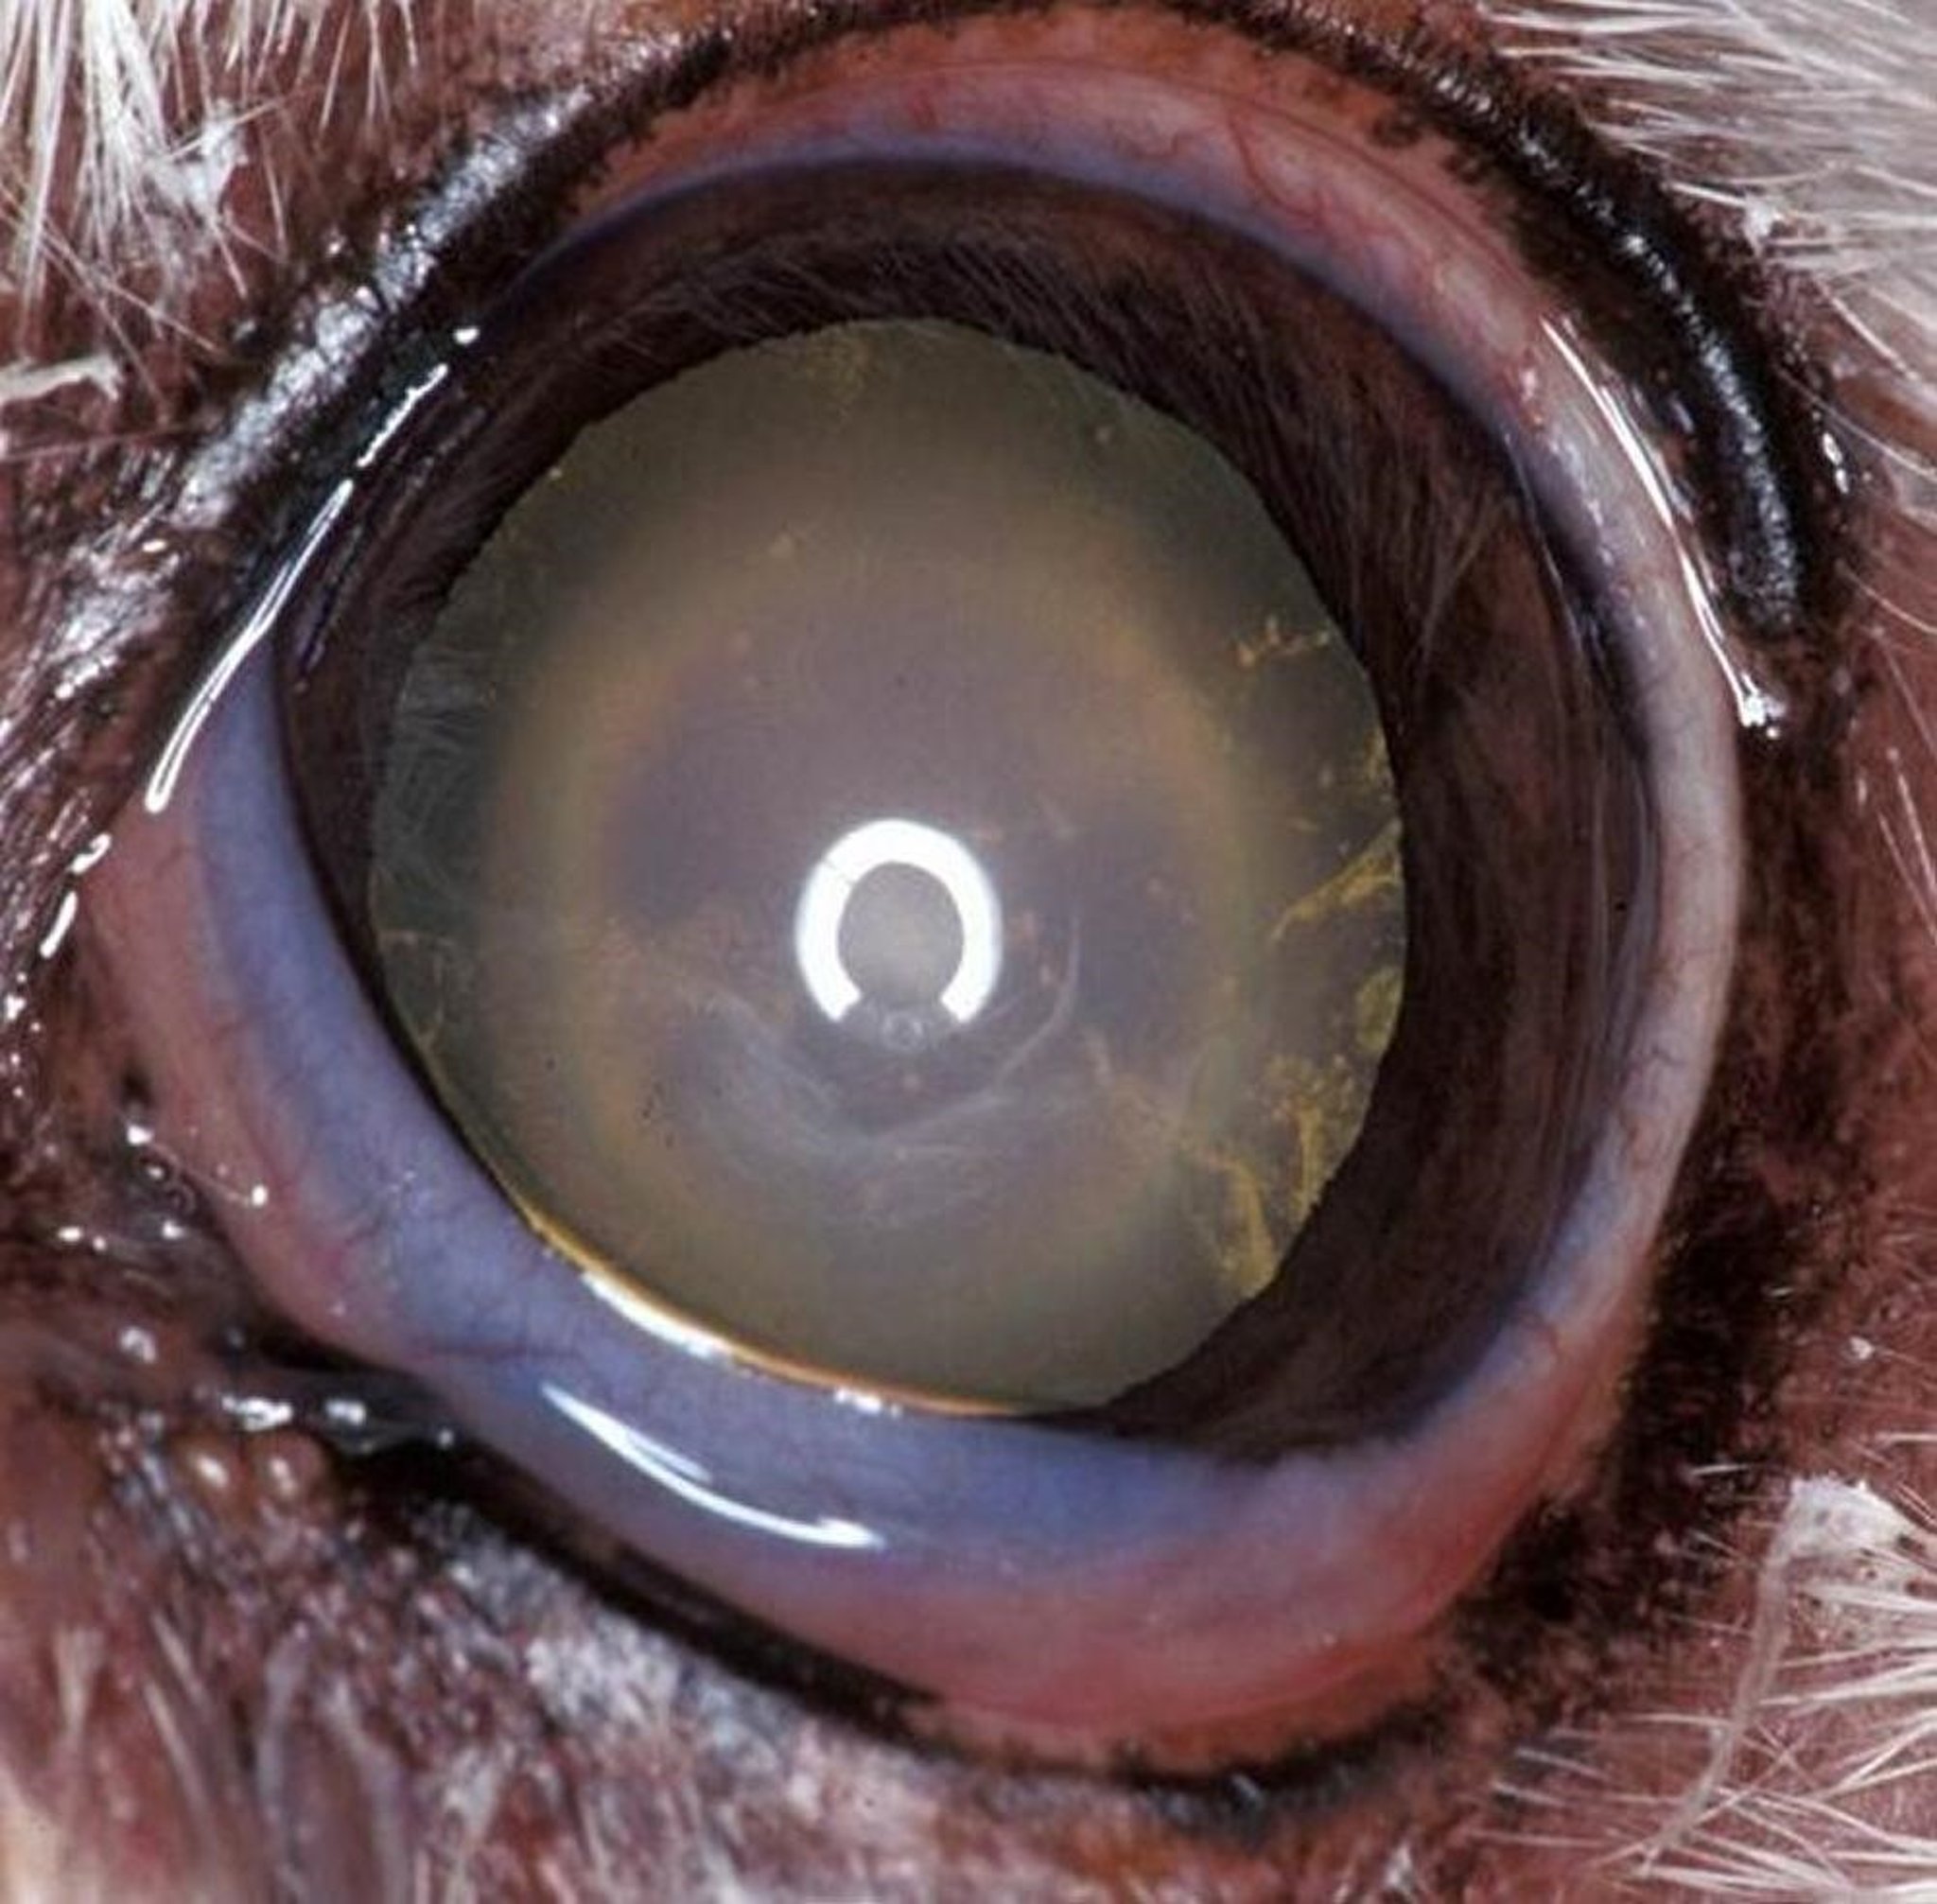 Nuclear sclerosis and early cataract formation, dog